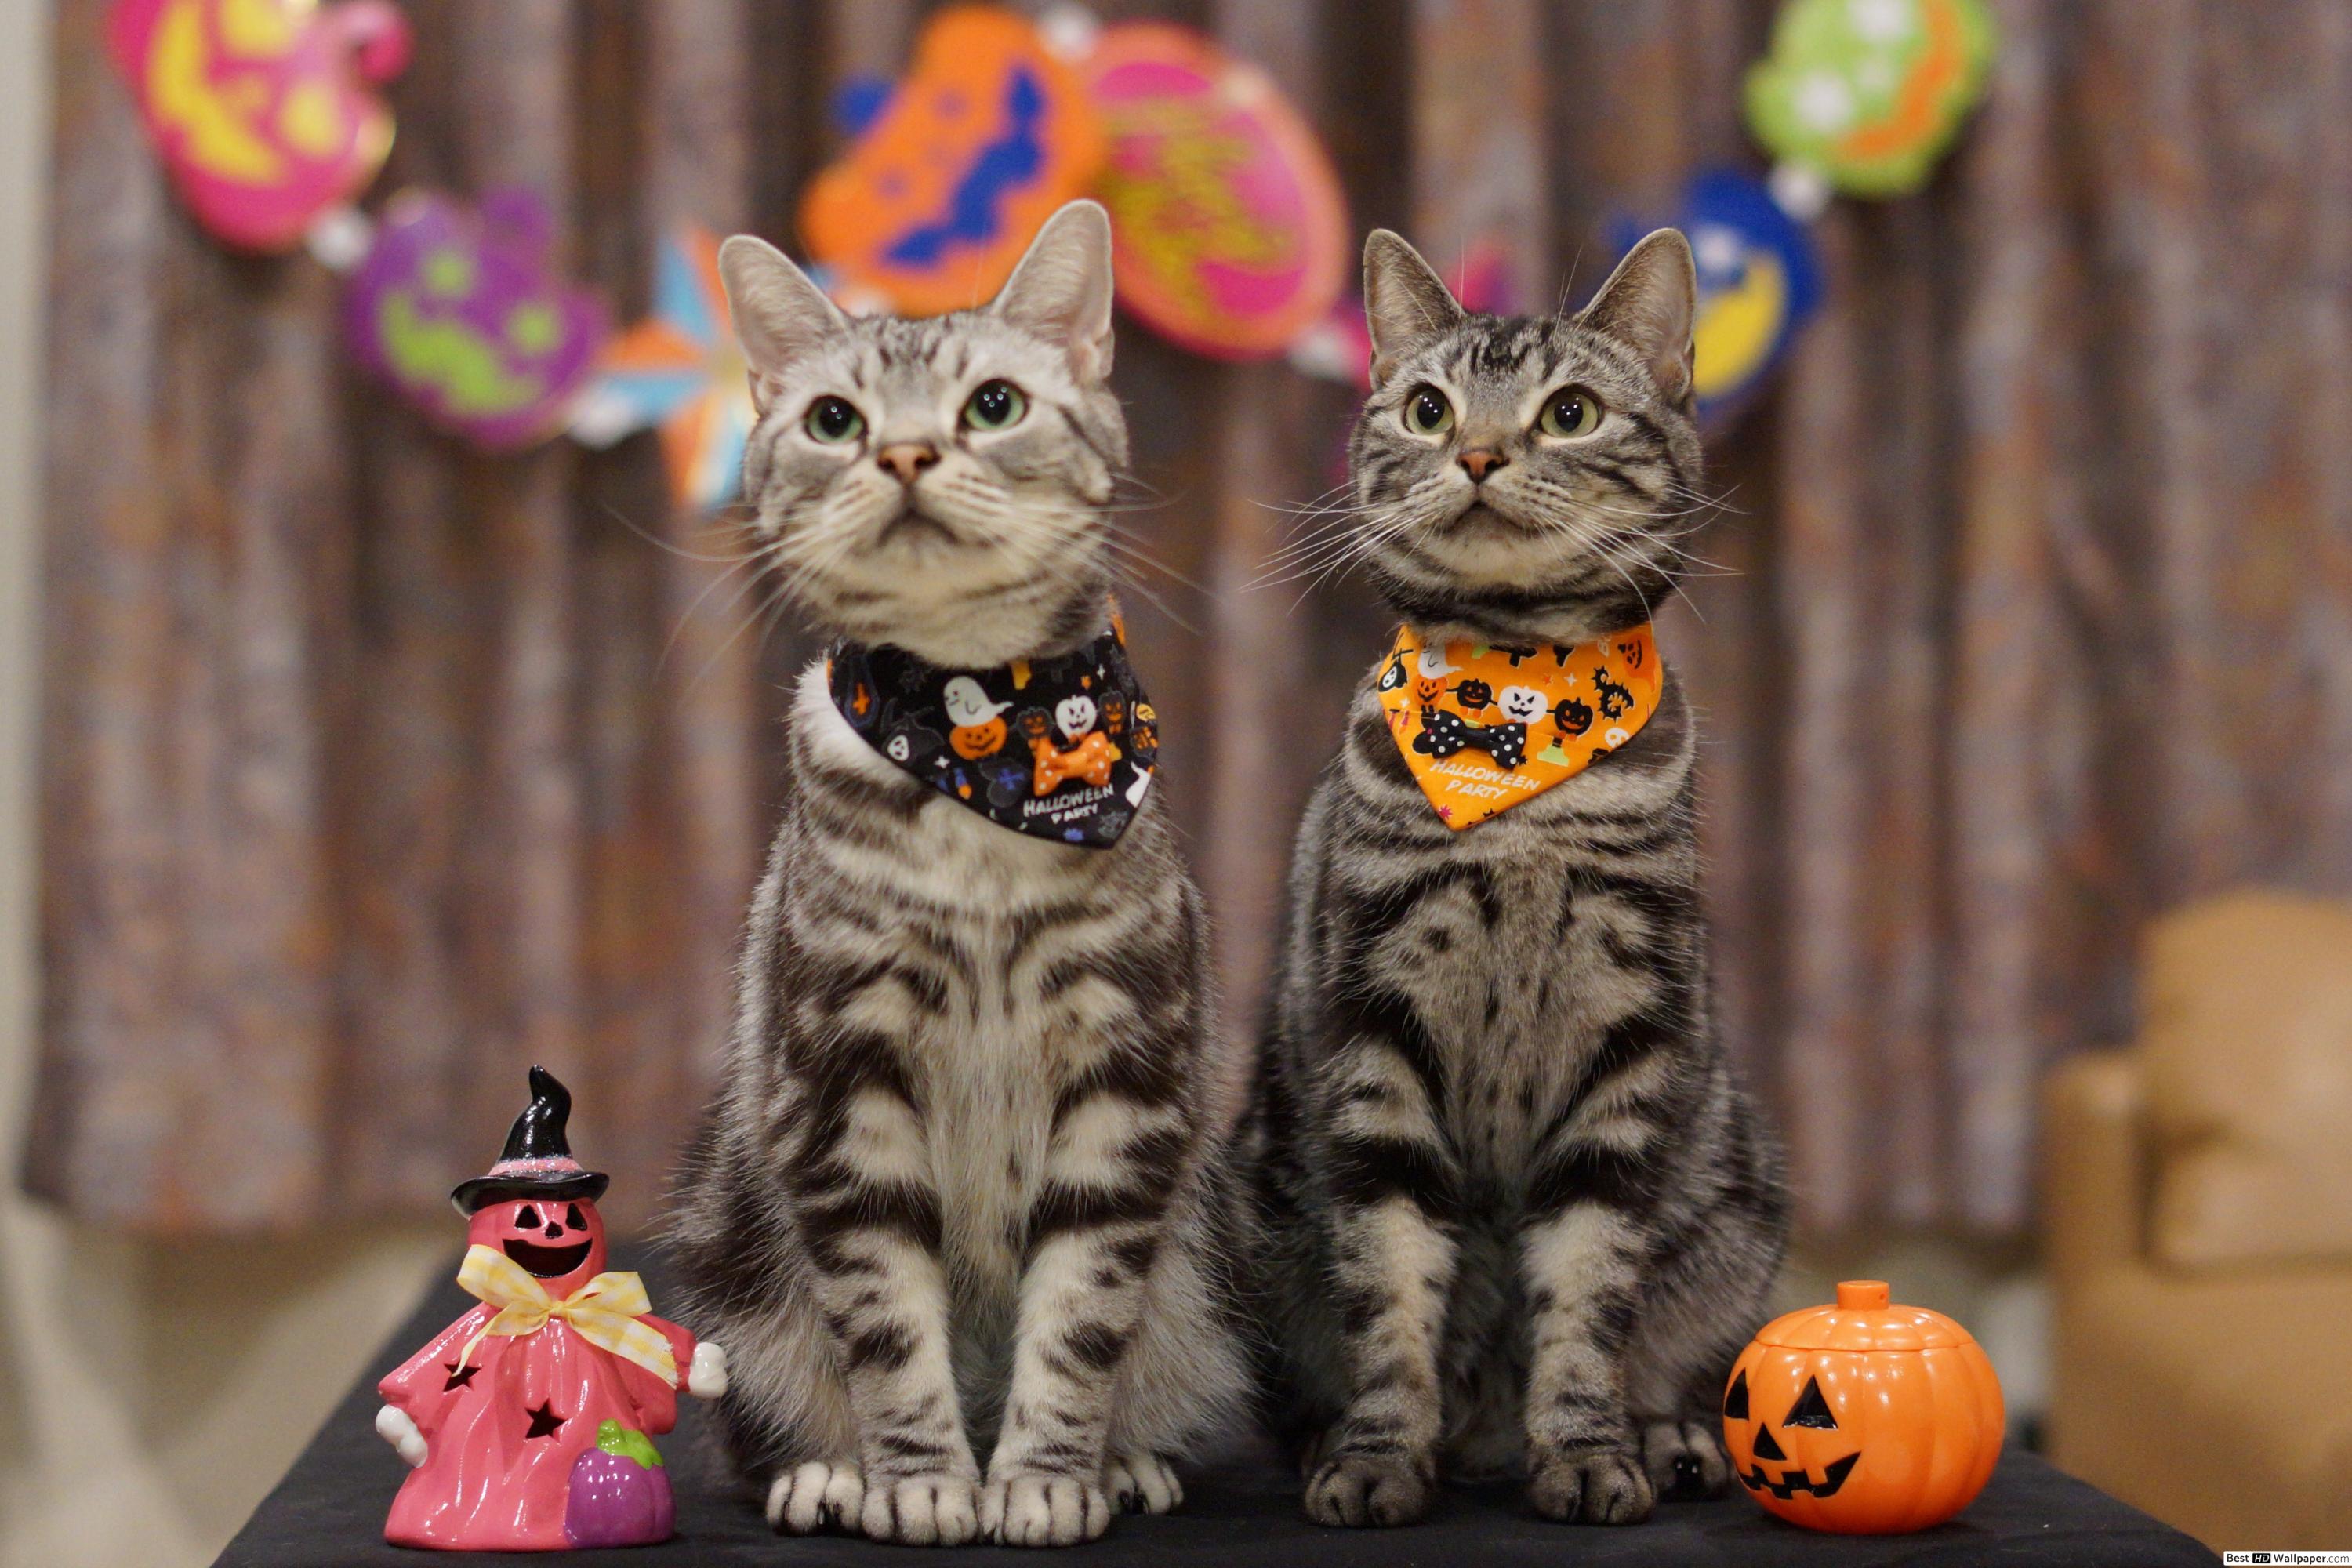 Cats costume to celebrate Halloween HD wallpaper download